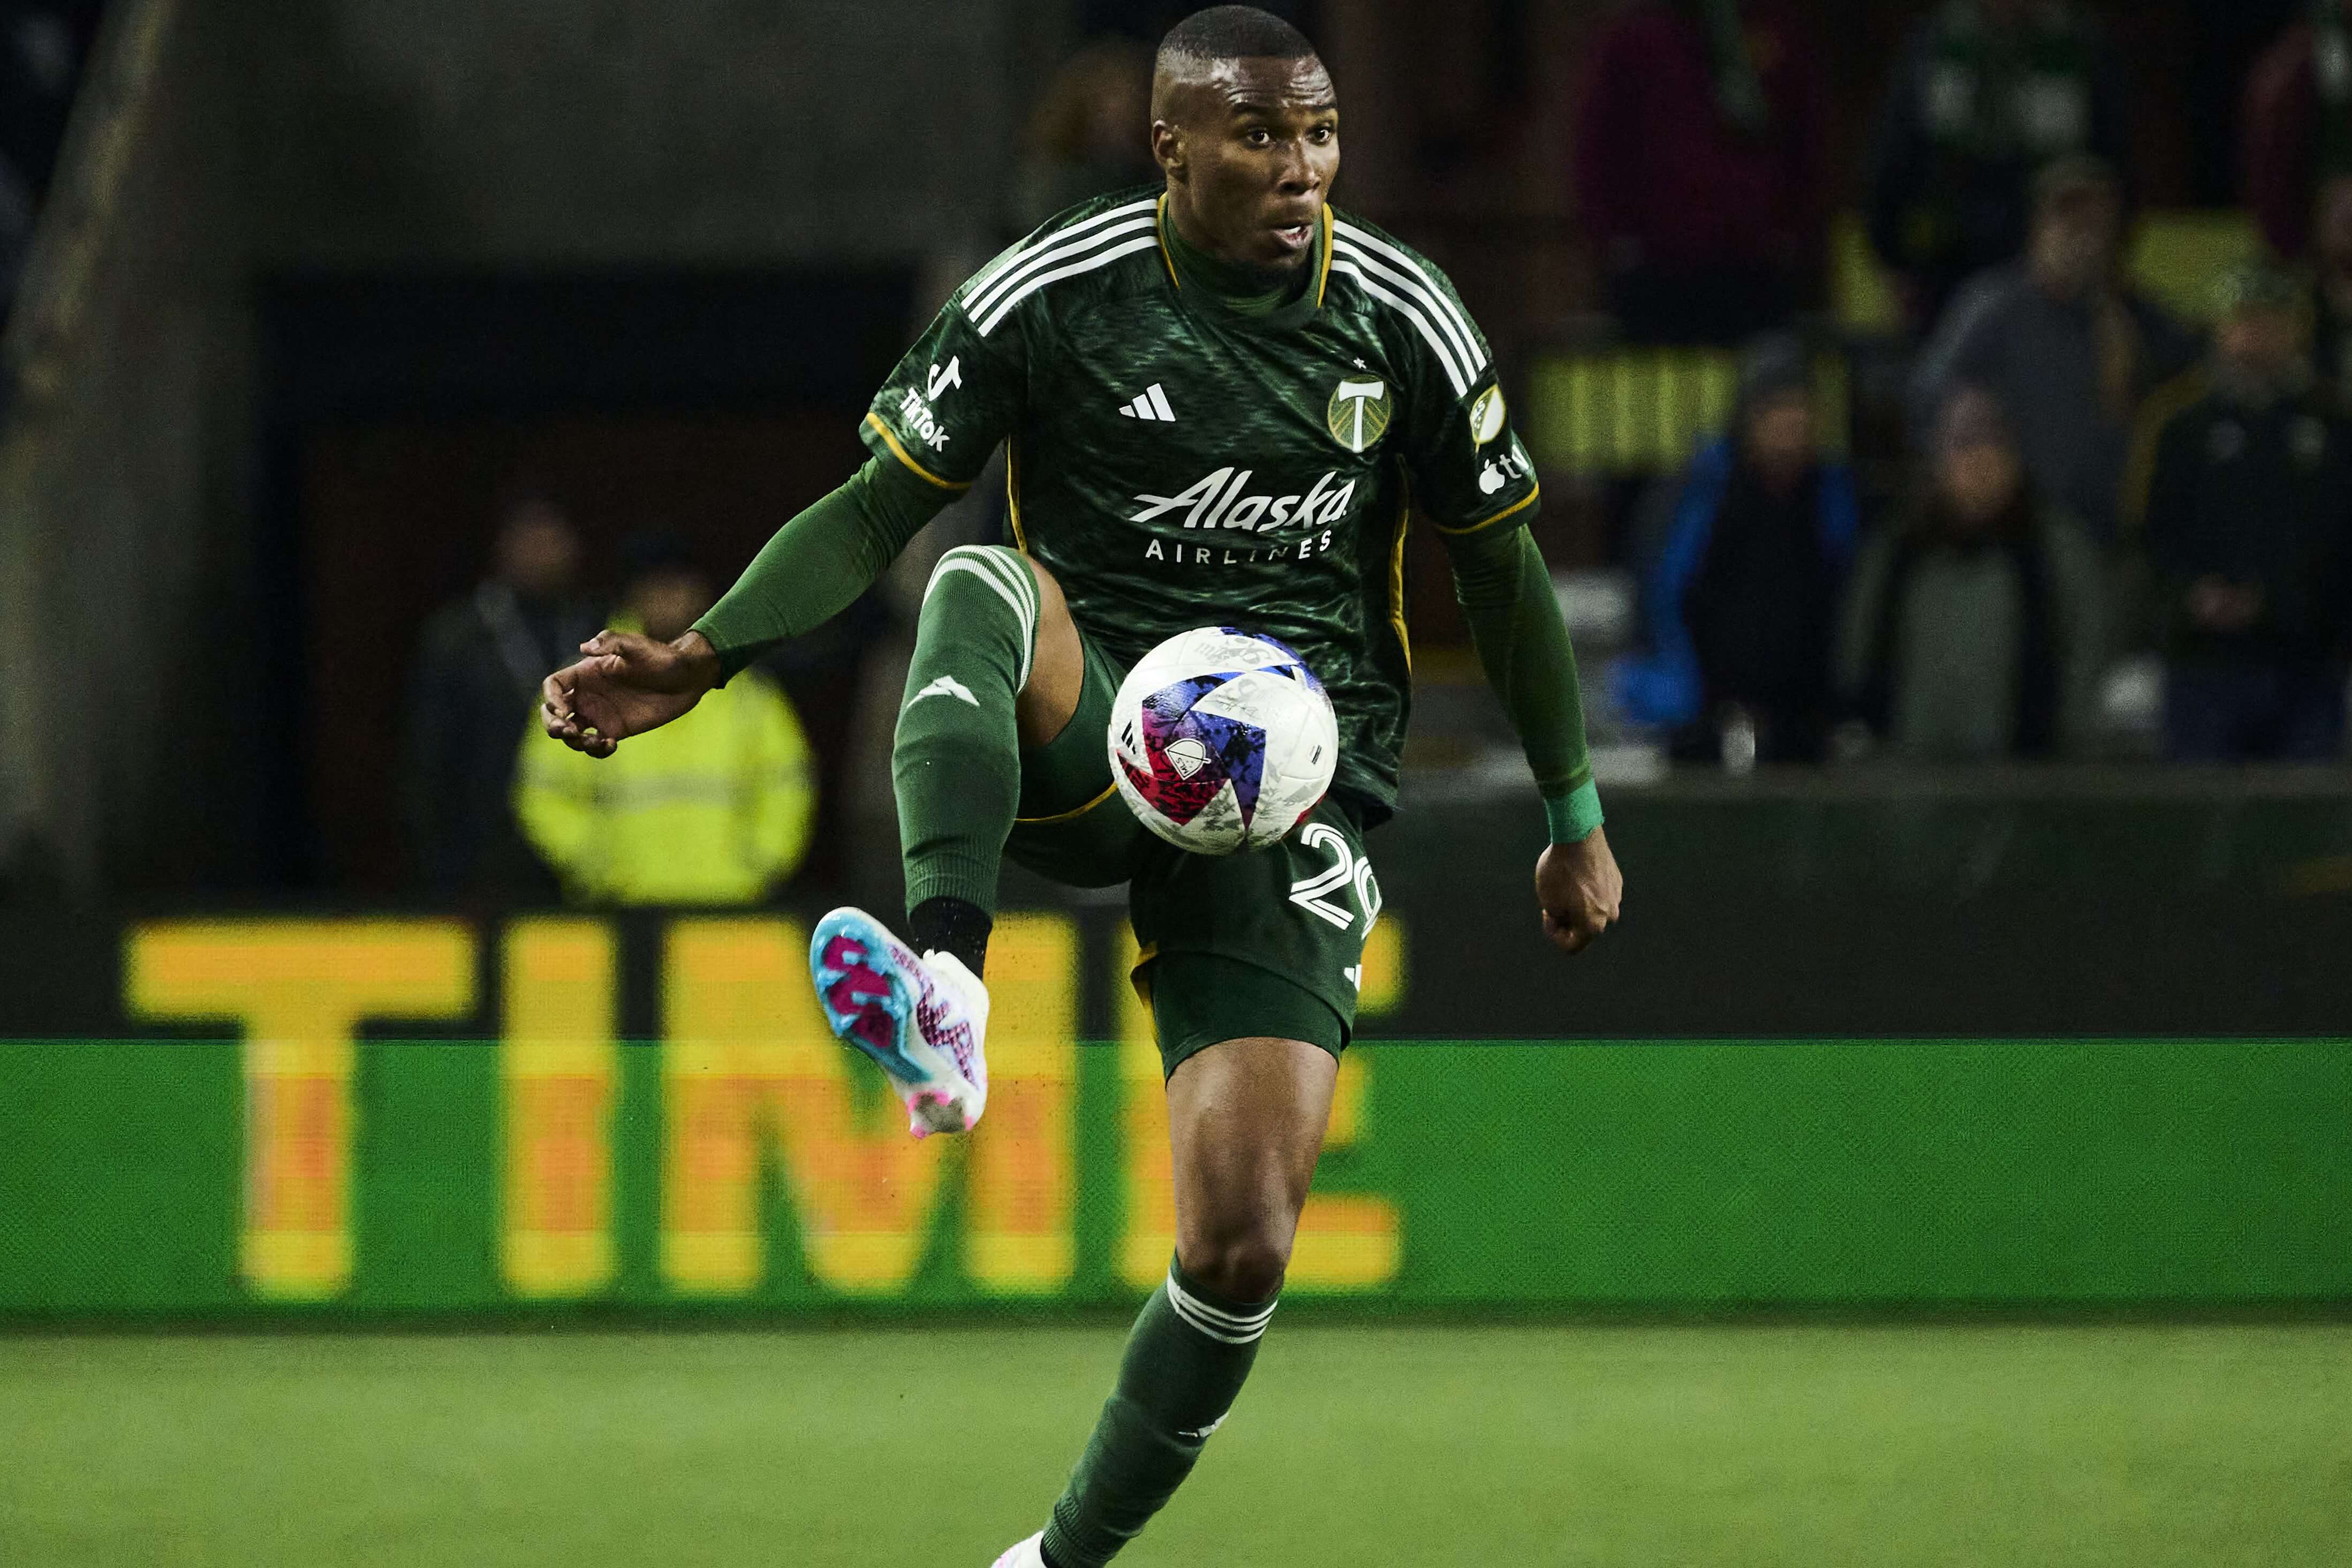 Portland Timbers vs LA Galaxy Picks and Predictions: Goals Come at Fast and Furious Pace